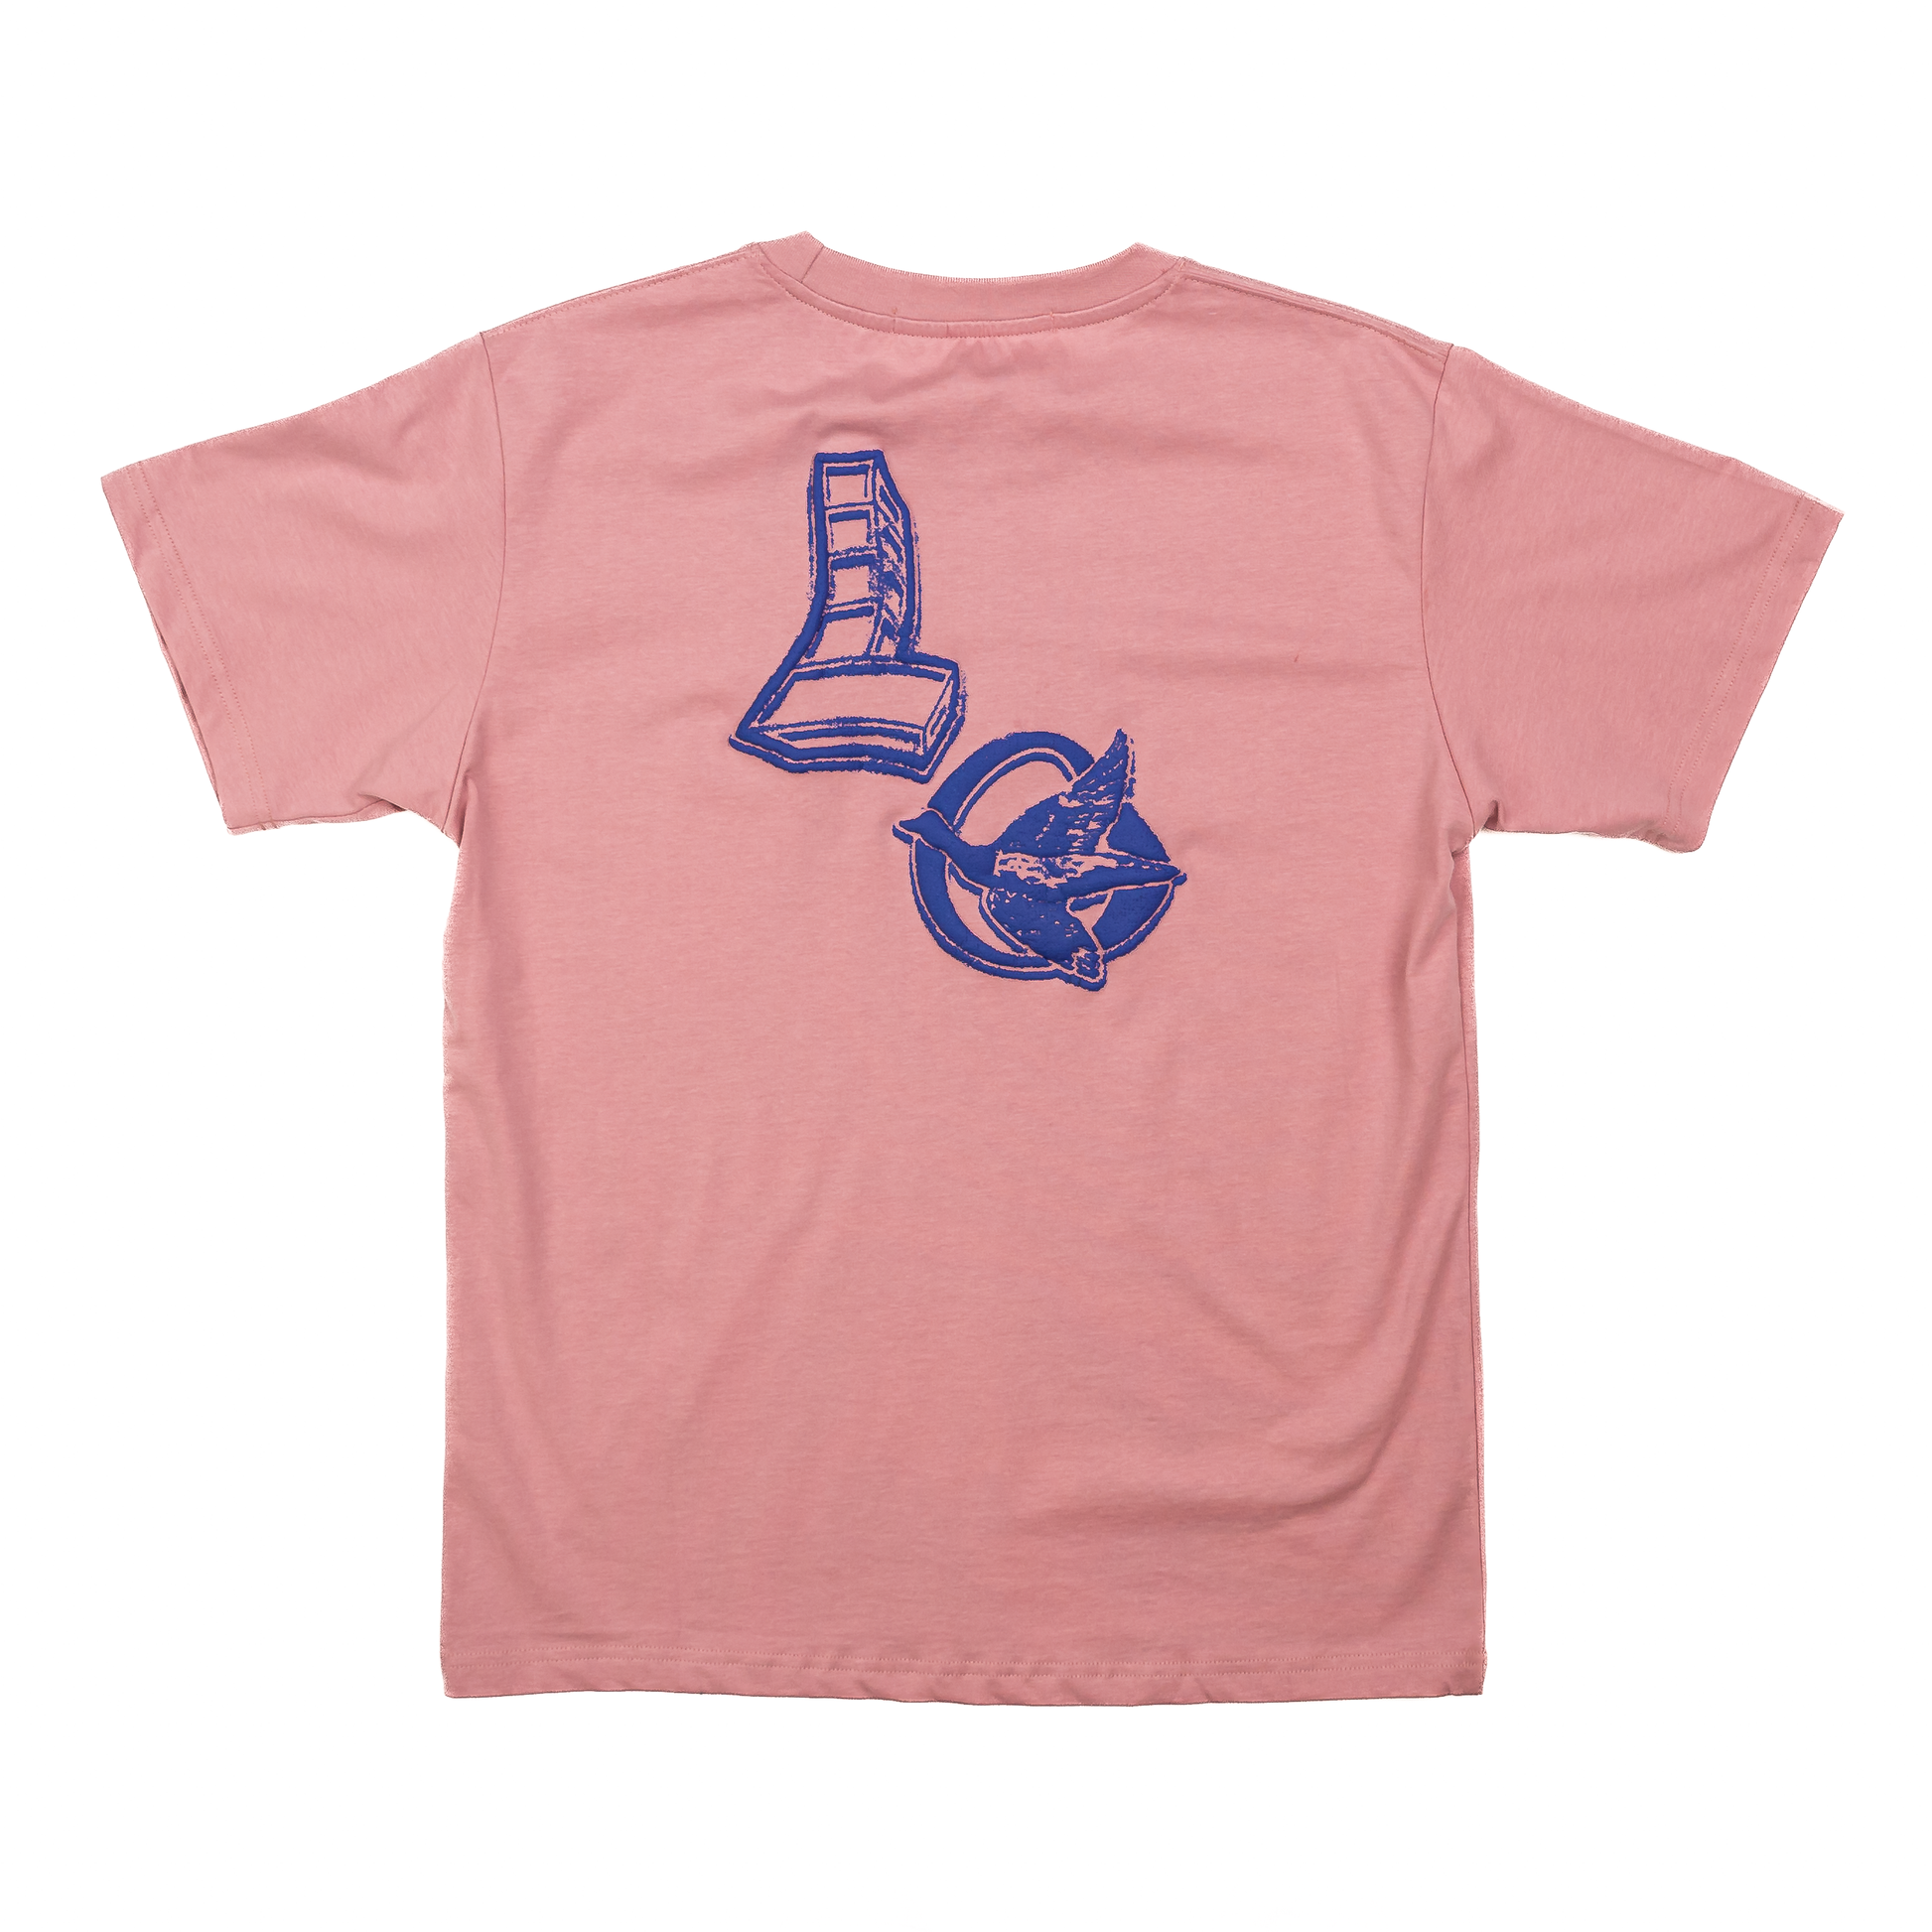 New LO Puff Tee, Washed Pink – Layr Official